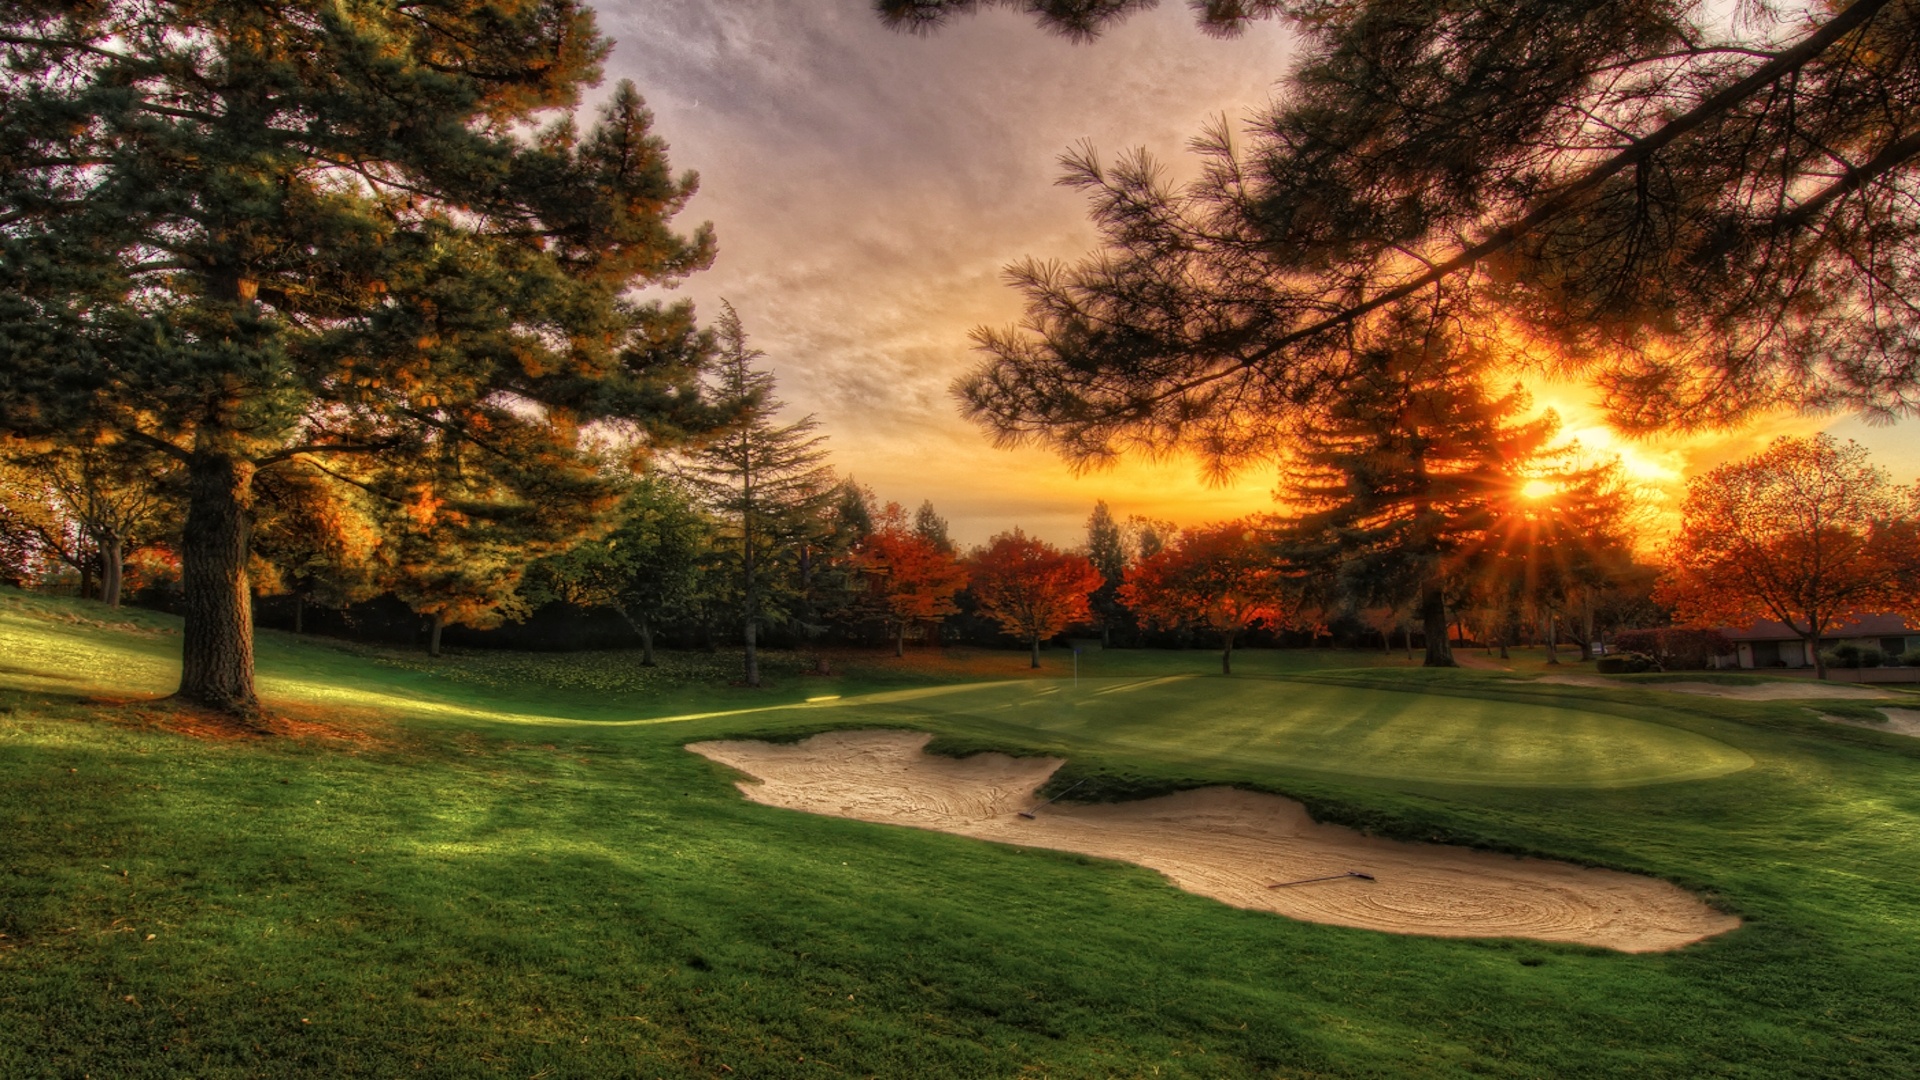 Free Golf Backgrounds | Wallpapers, Backgrounds, Images, Art Photos.